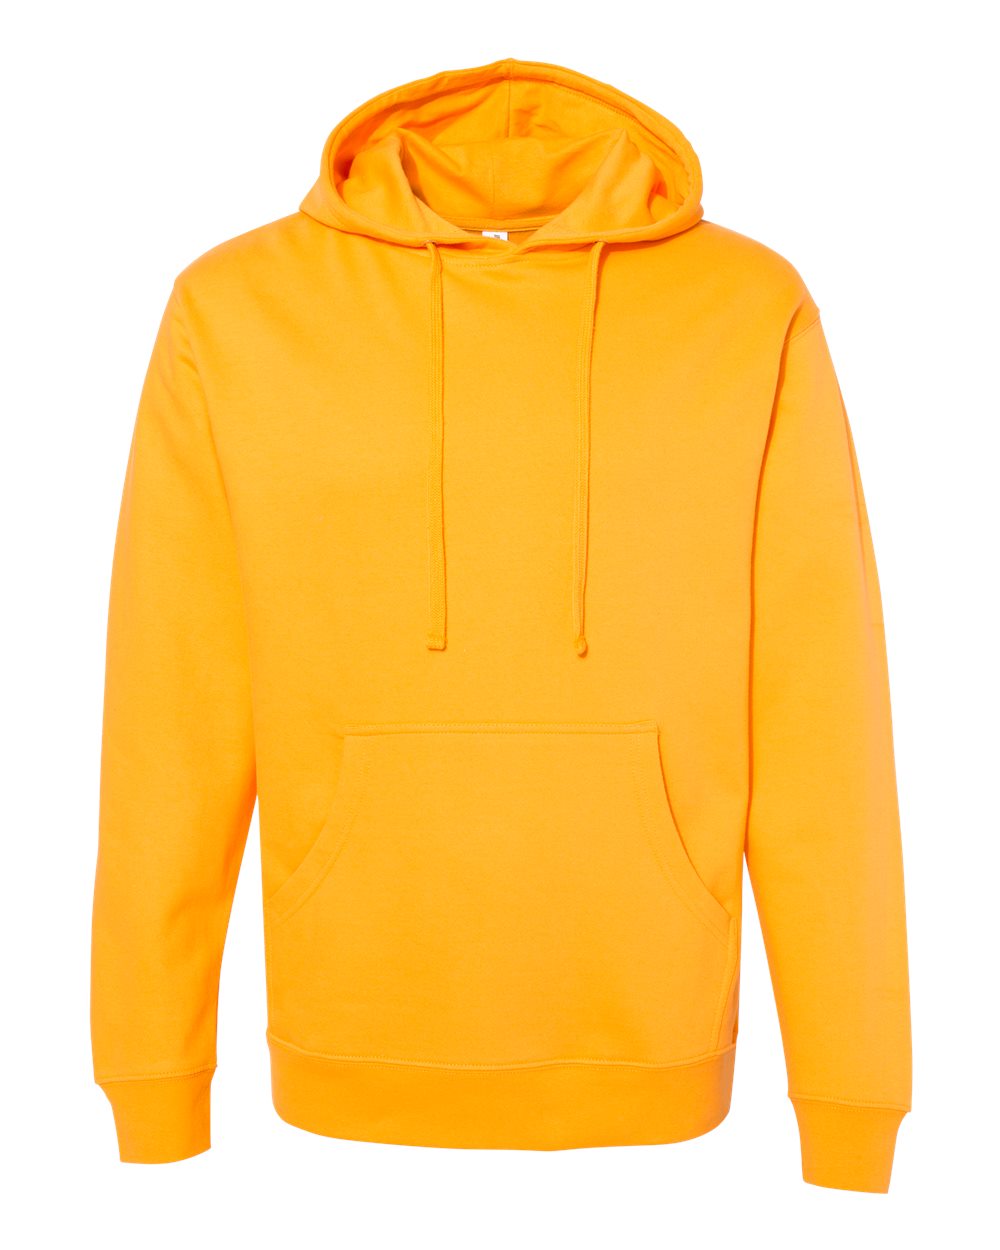 Midweight Hooded Sweatshirt Child Product 1